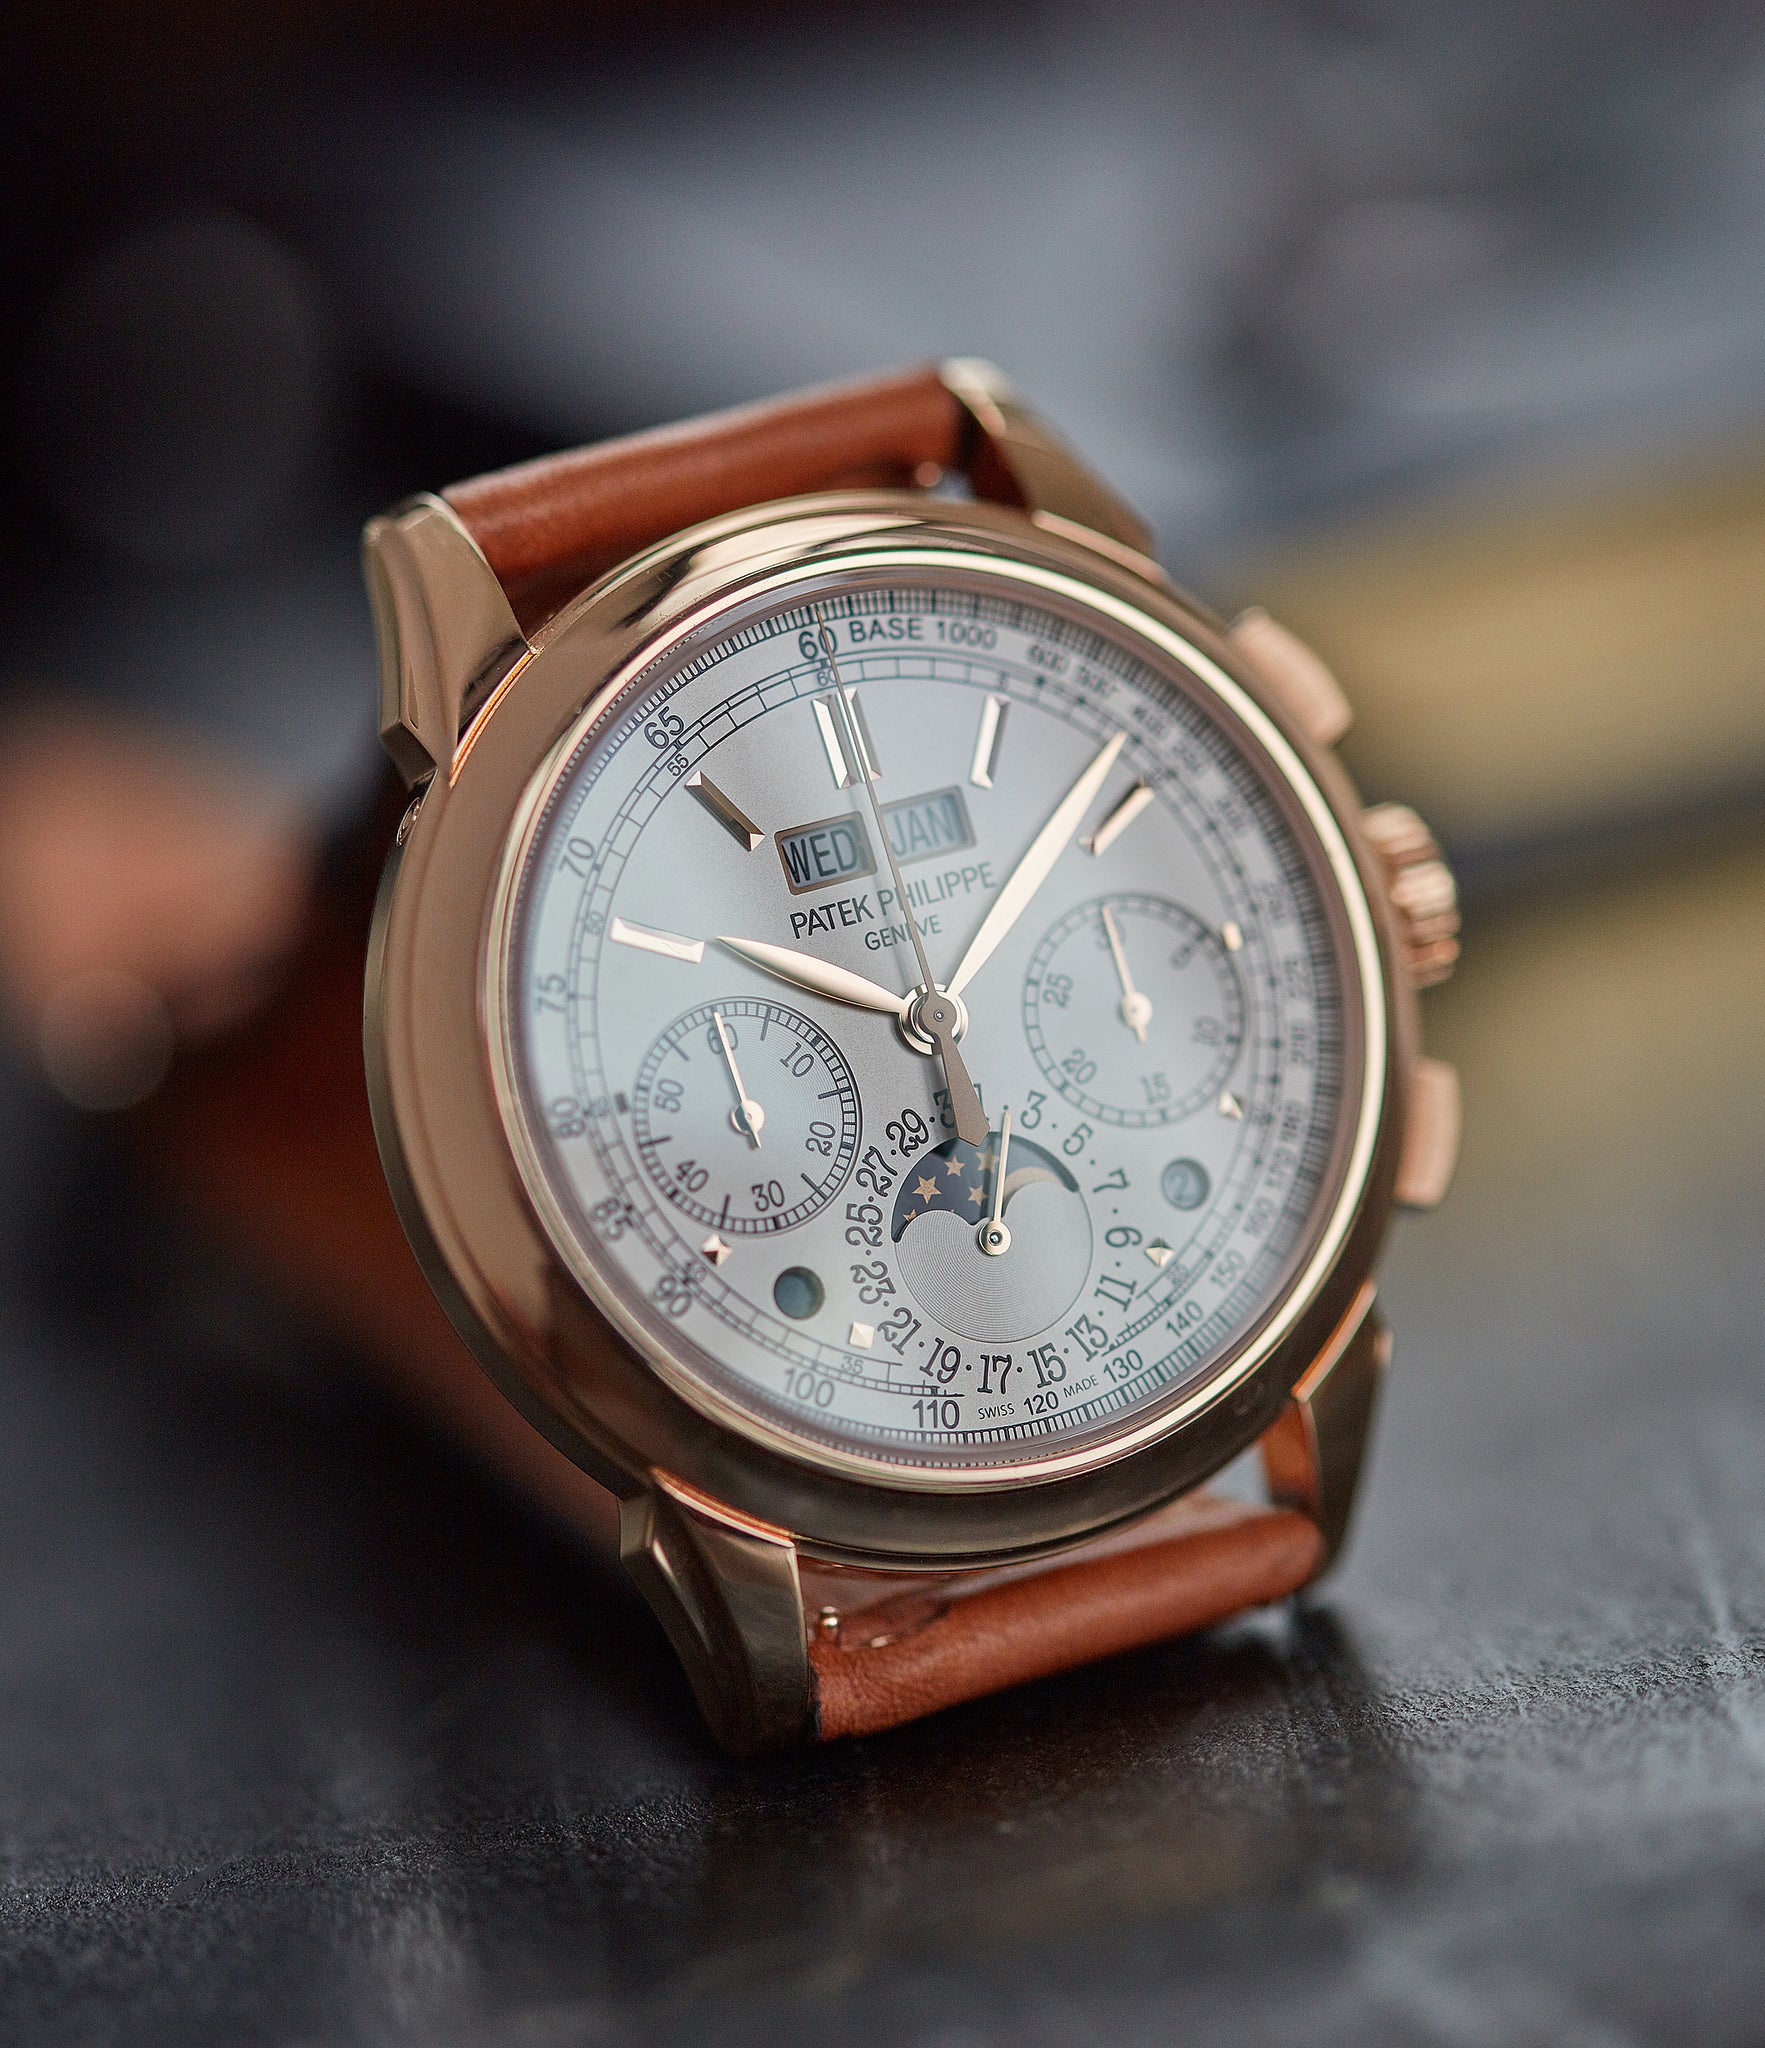 Patek Philippe Grand Complications full rose gold 5270R-001 Perpetual Calendar Chronograph dress watch for sale online at A Collected Man London UK specialist of rare watches